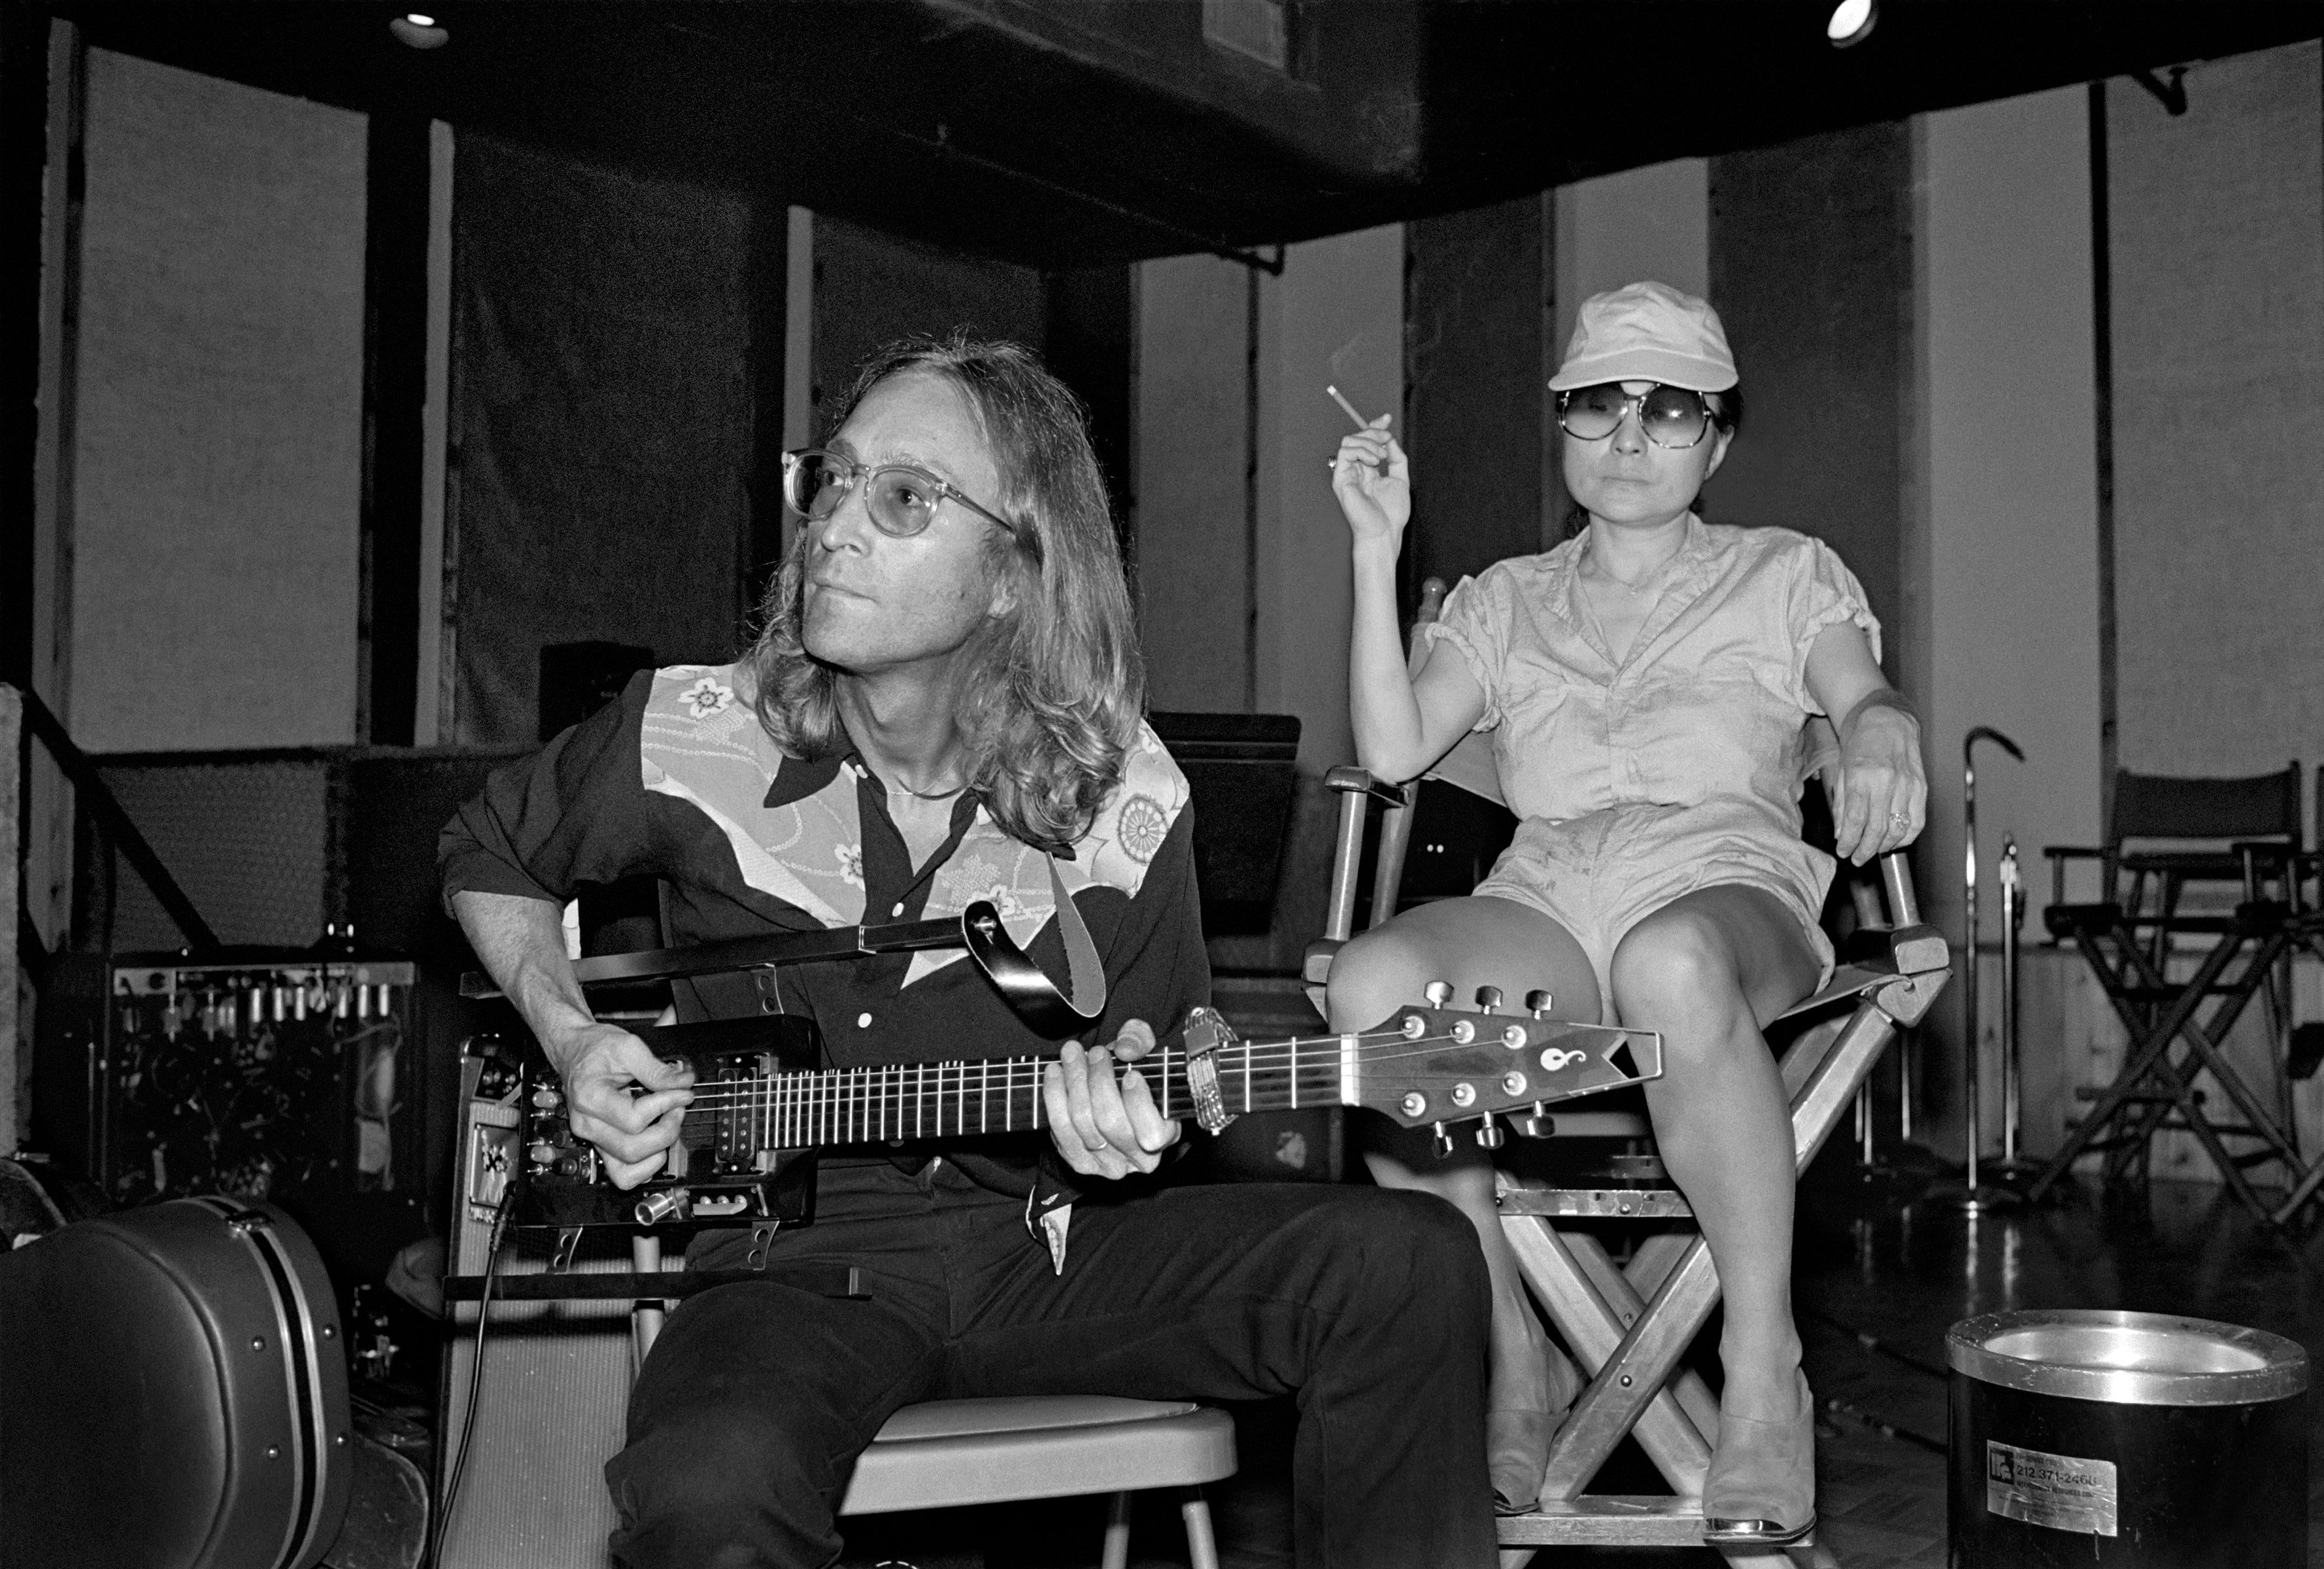 John Lennon noodles on his rare Sardonyx guitar while Yoko Ono enjoys a smoke at the Hit Factory in Manhattan on 7 August, 1980, the first day of recording for ‘Double Fantasy’